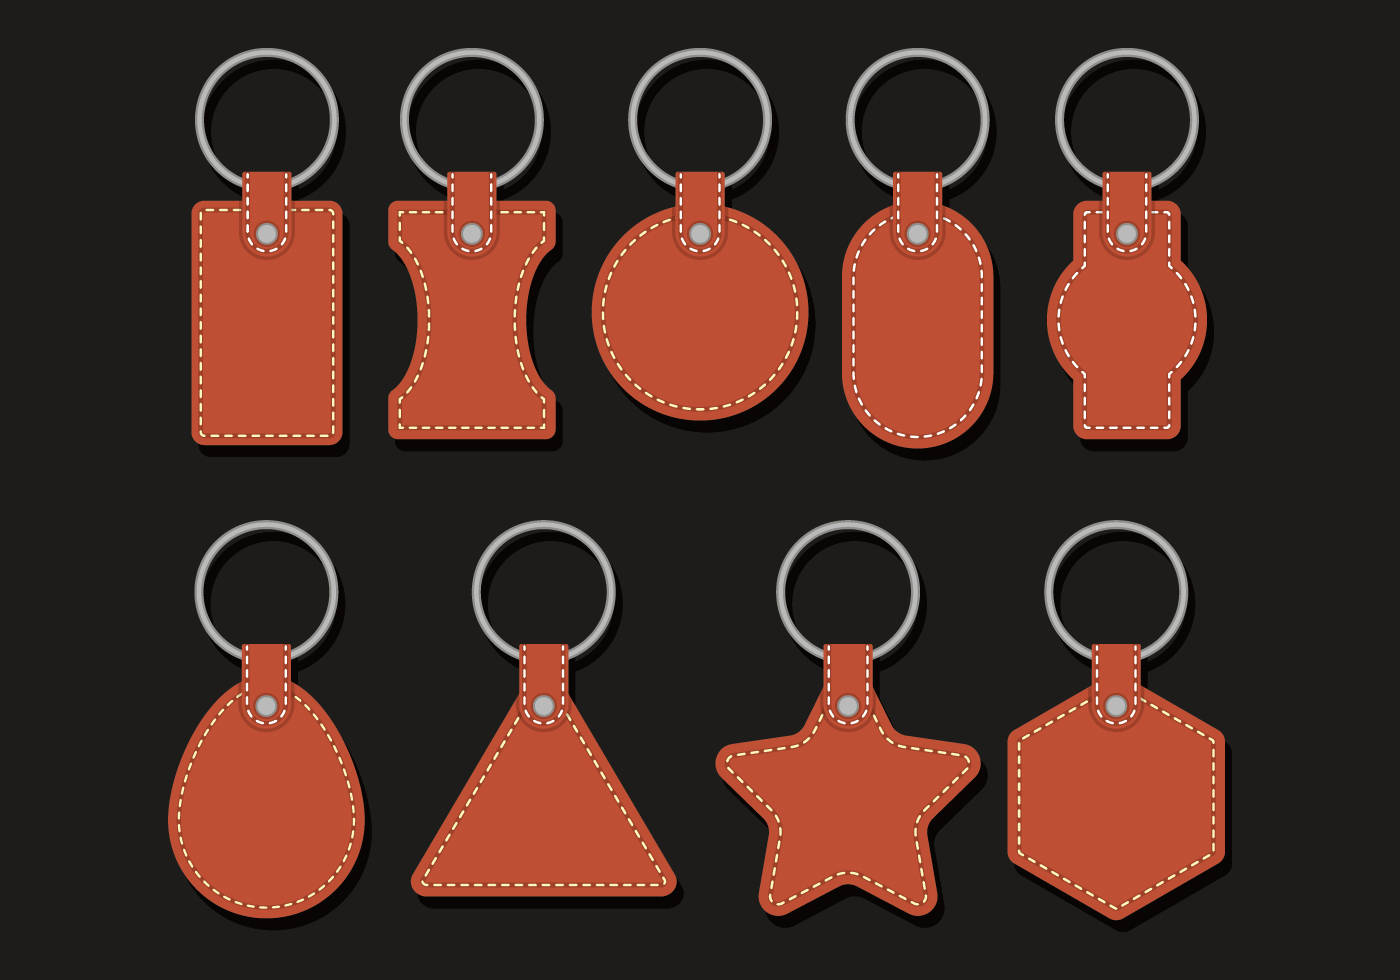 Leather Keychains Vectors Download Free Vector Art, Stock Graphics